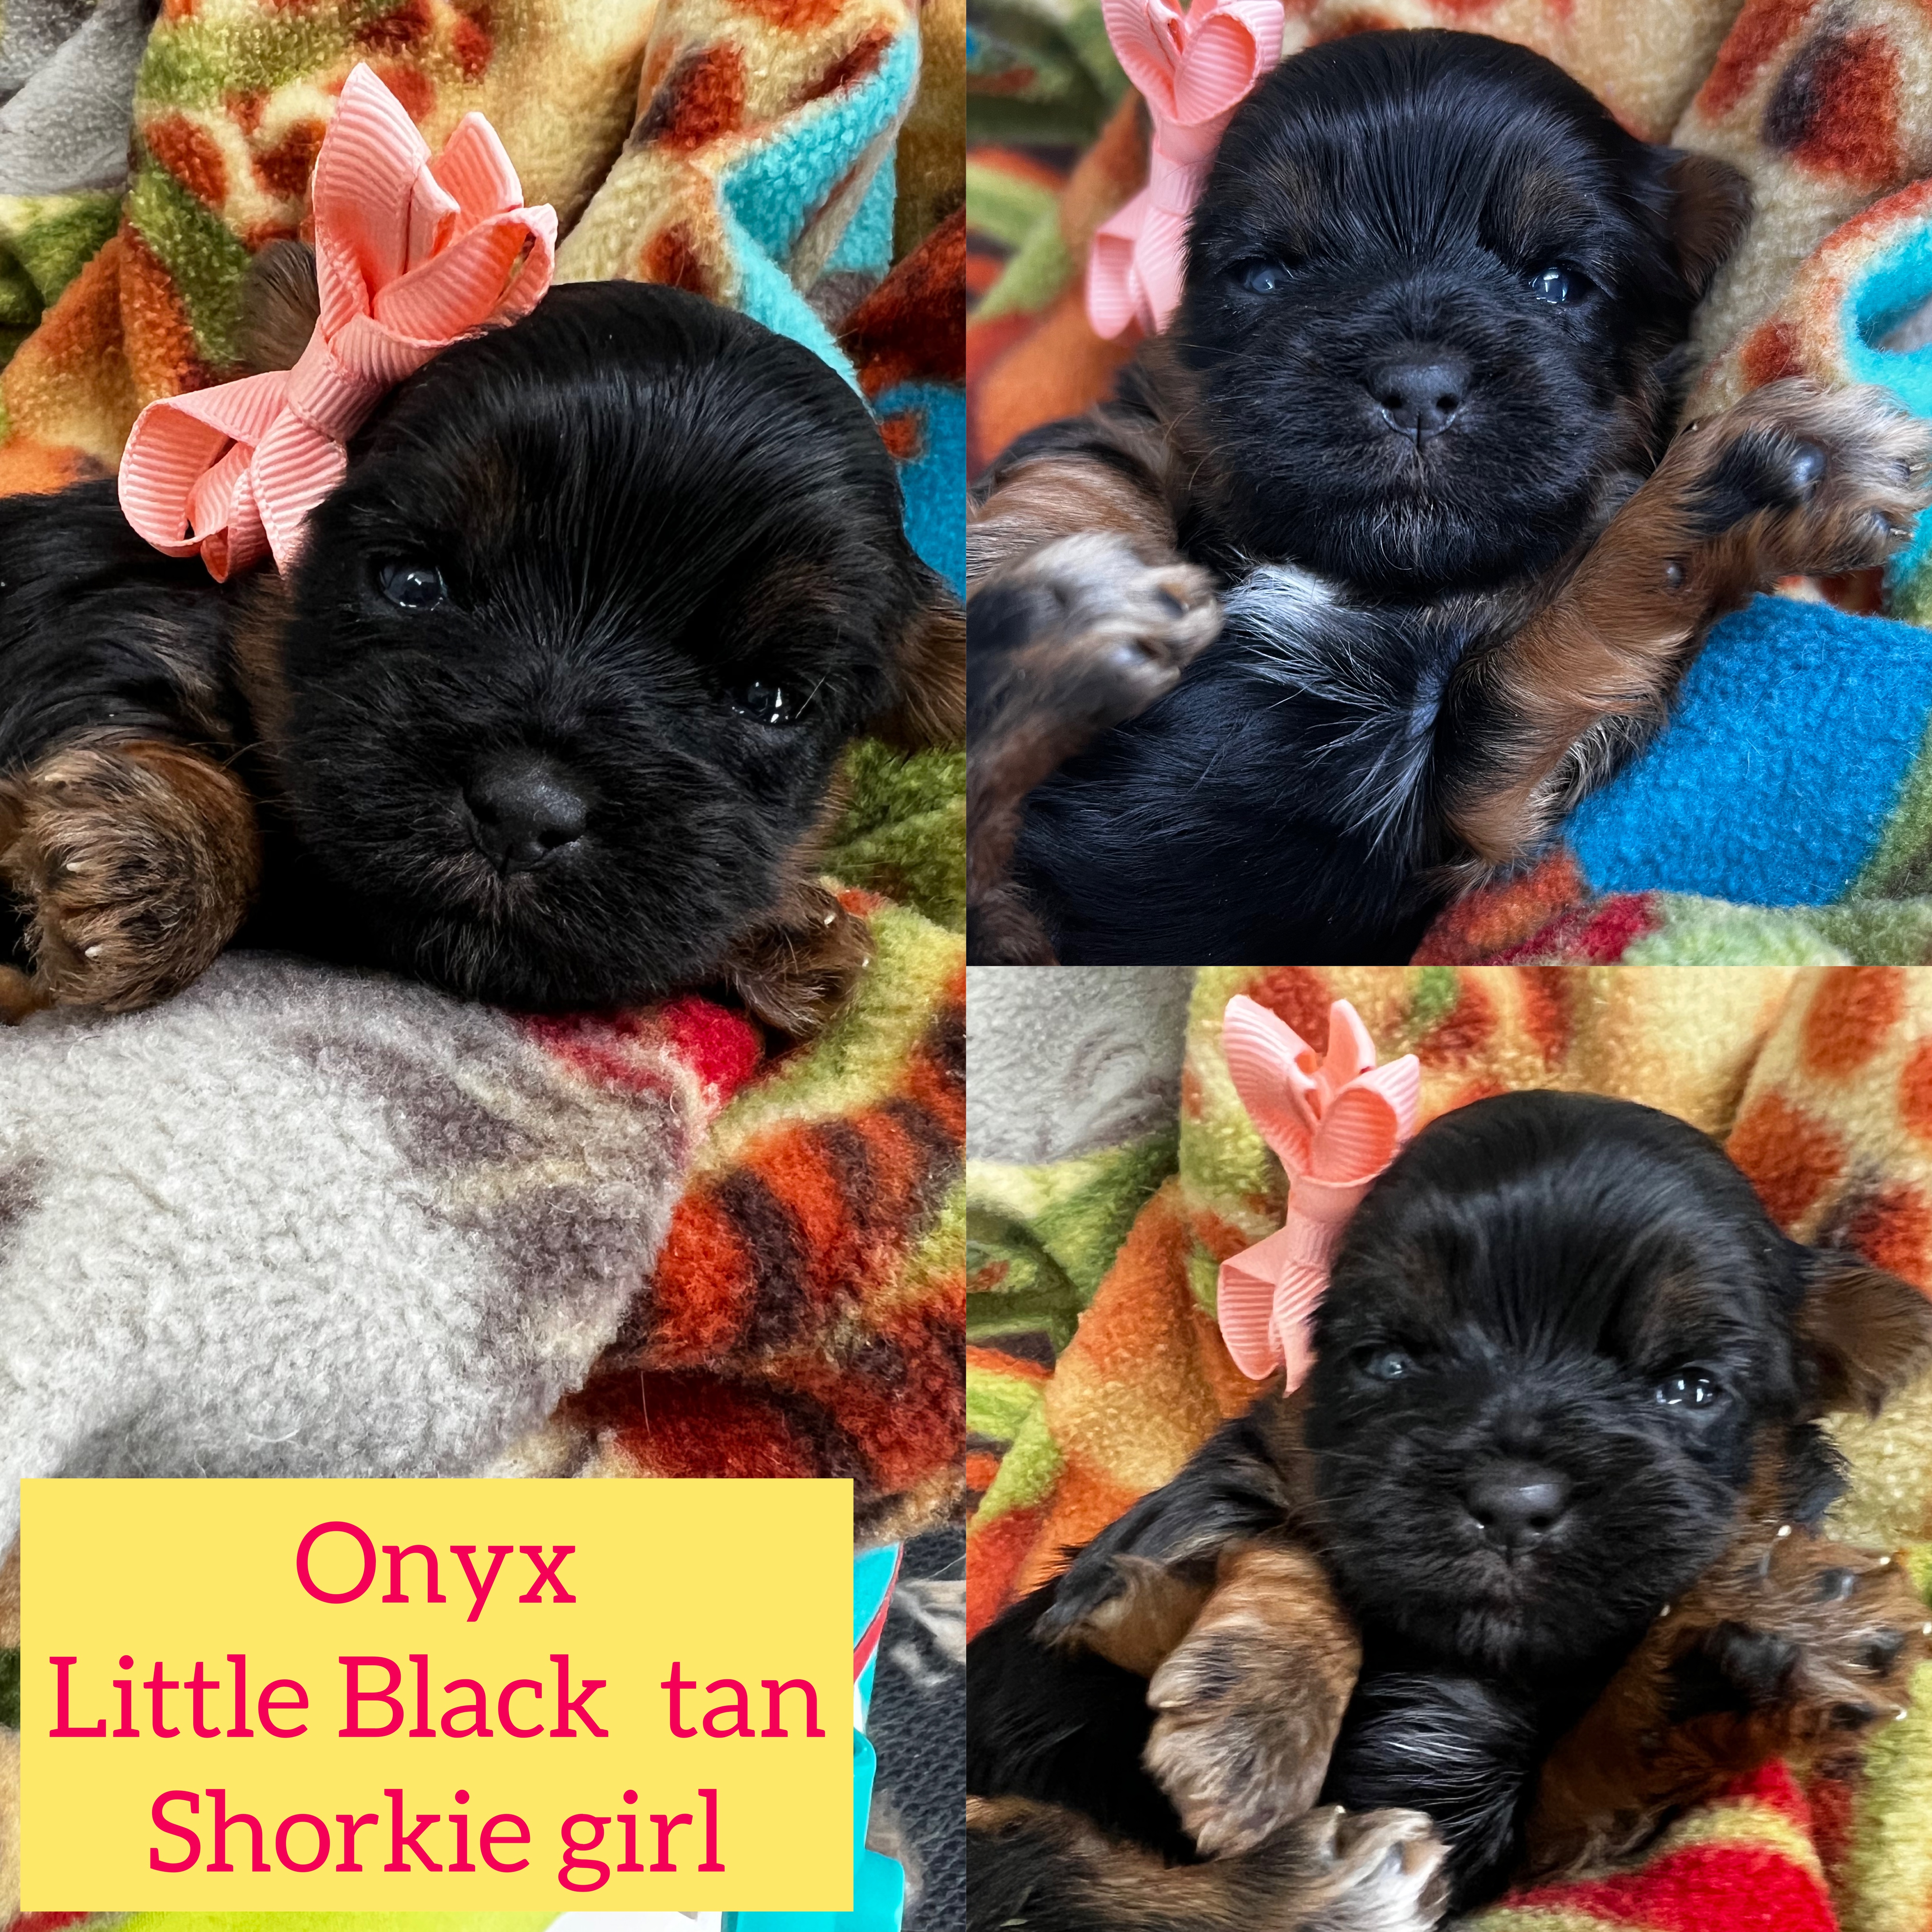 Onyx tblack and tan Shorkie girl click on pic for info